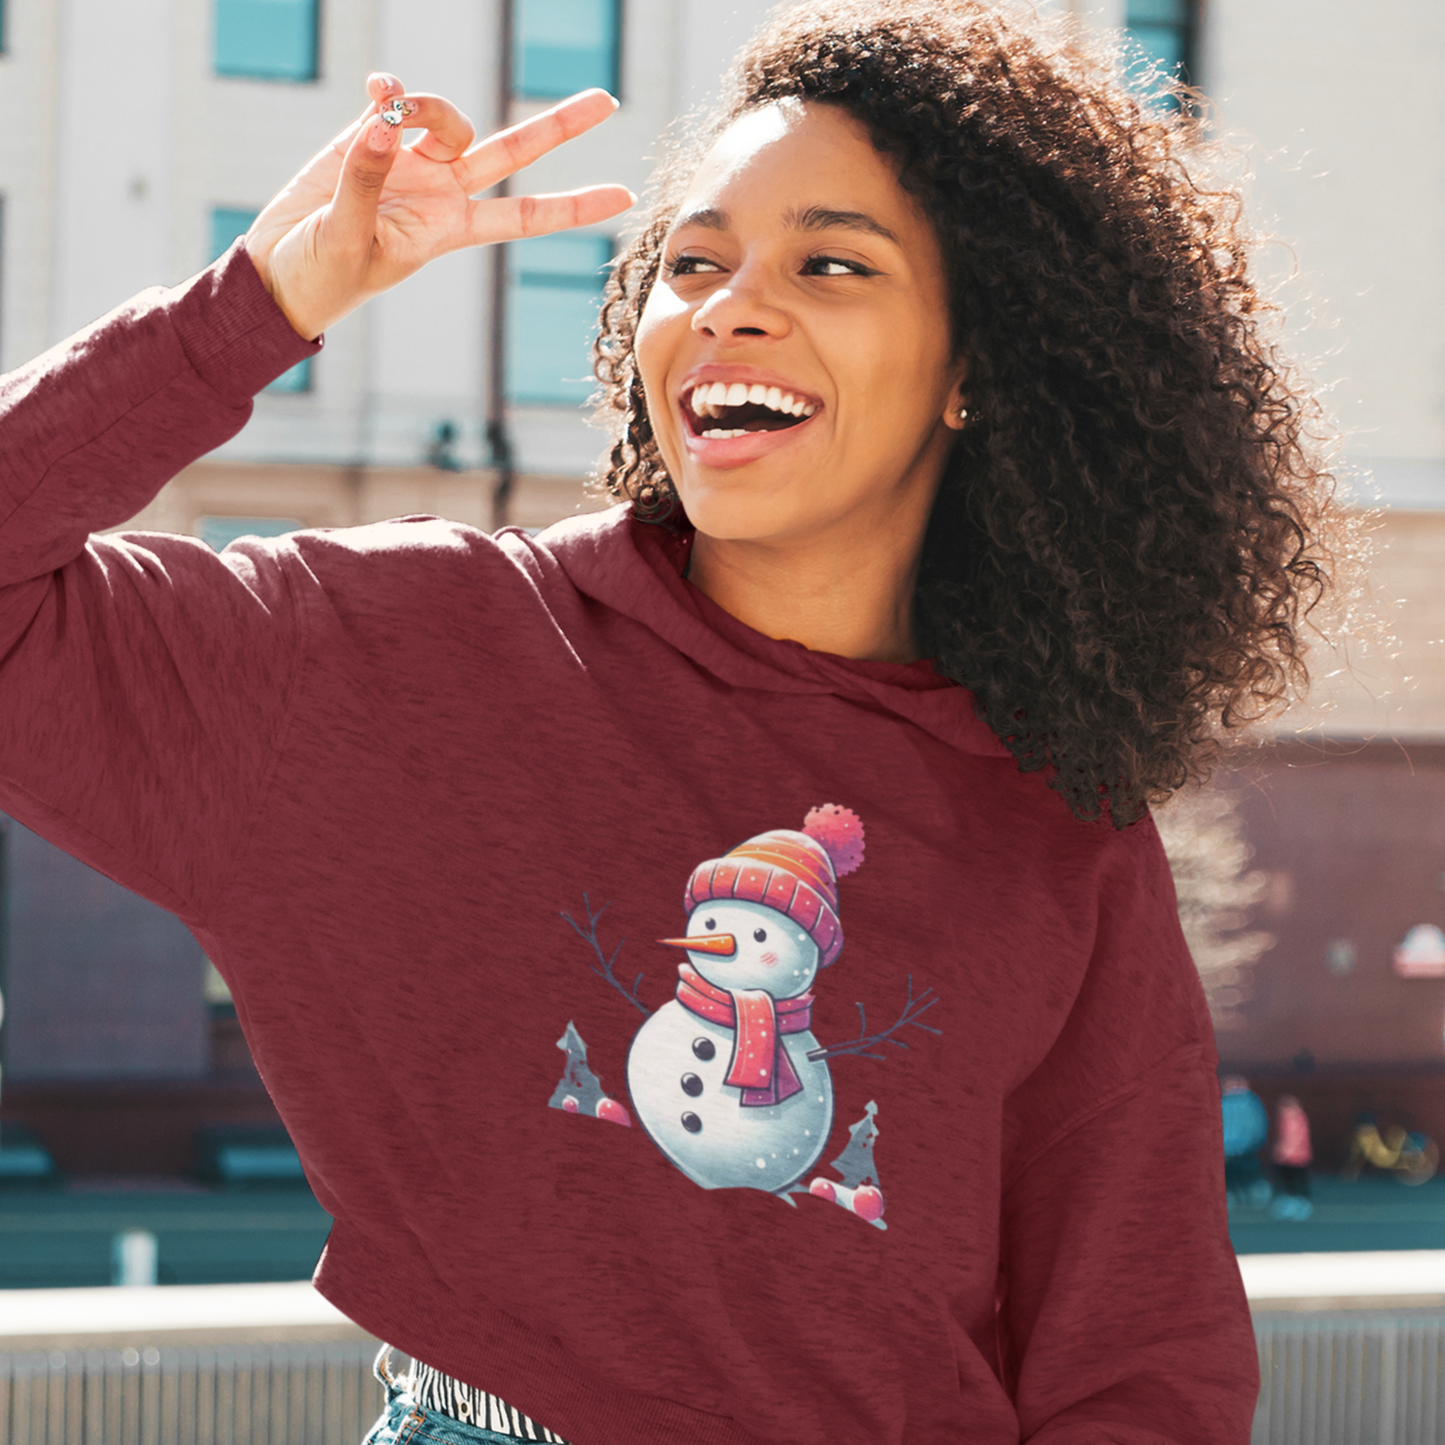 Winter Whimsy: Women's Printed Crop Hoody with Adorable Snowman